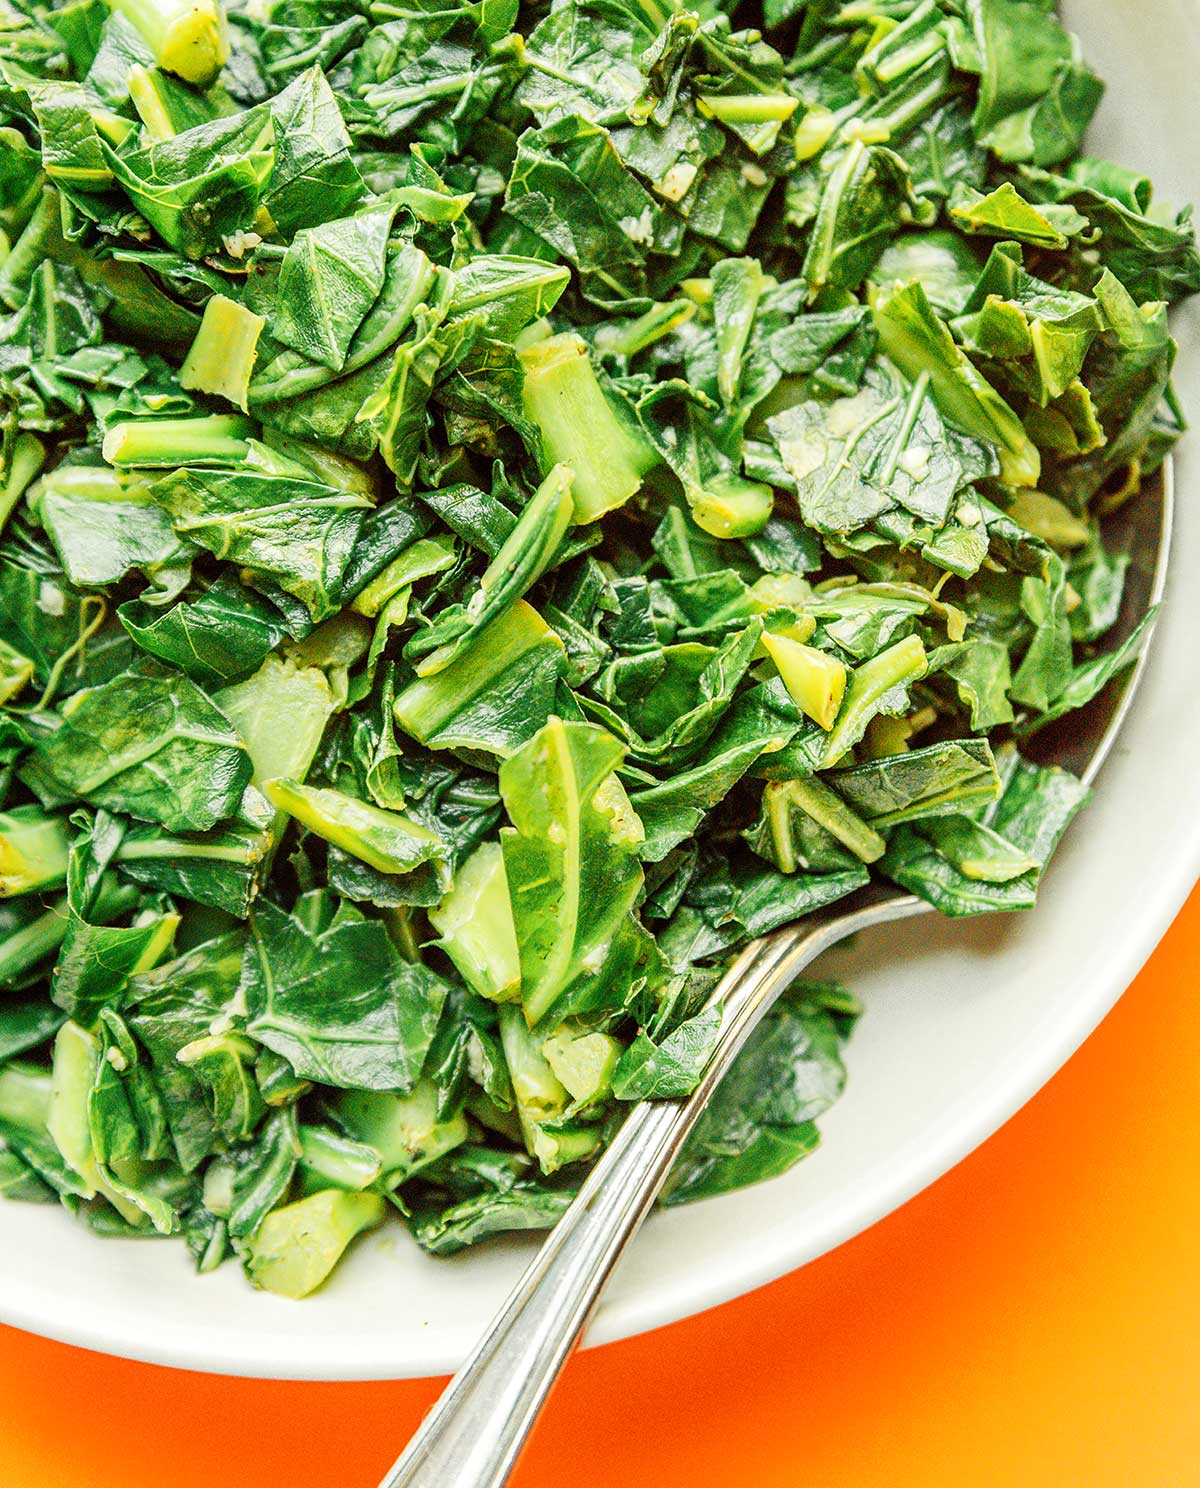 An up close look detailing the texture of chopped and sautéed collard greens